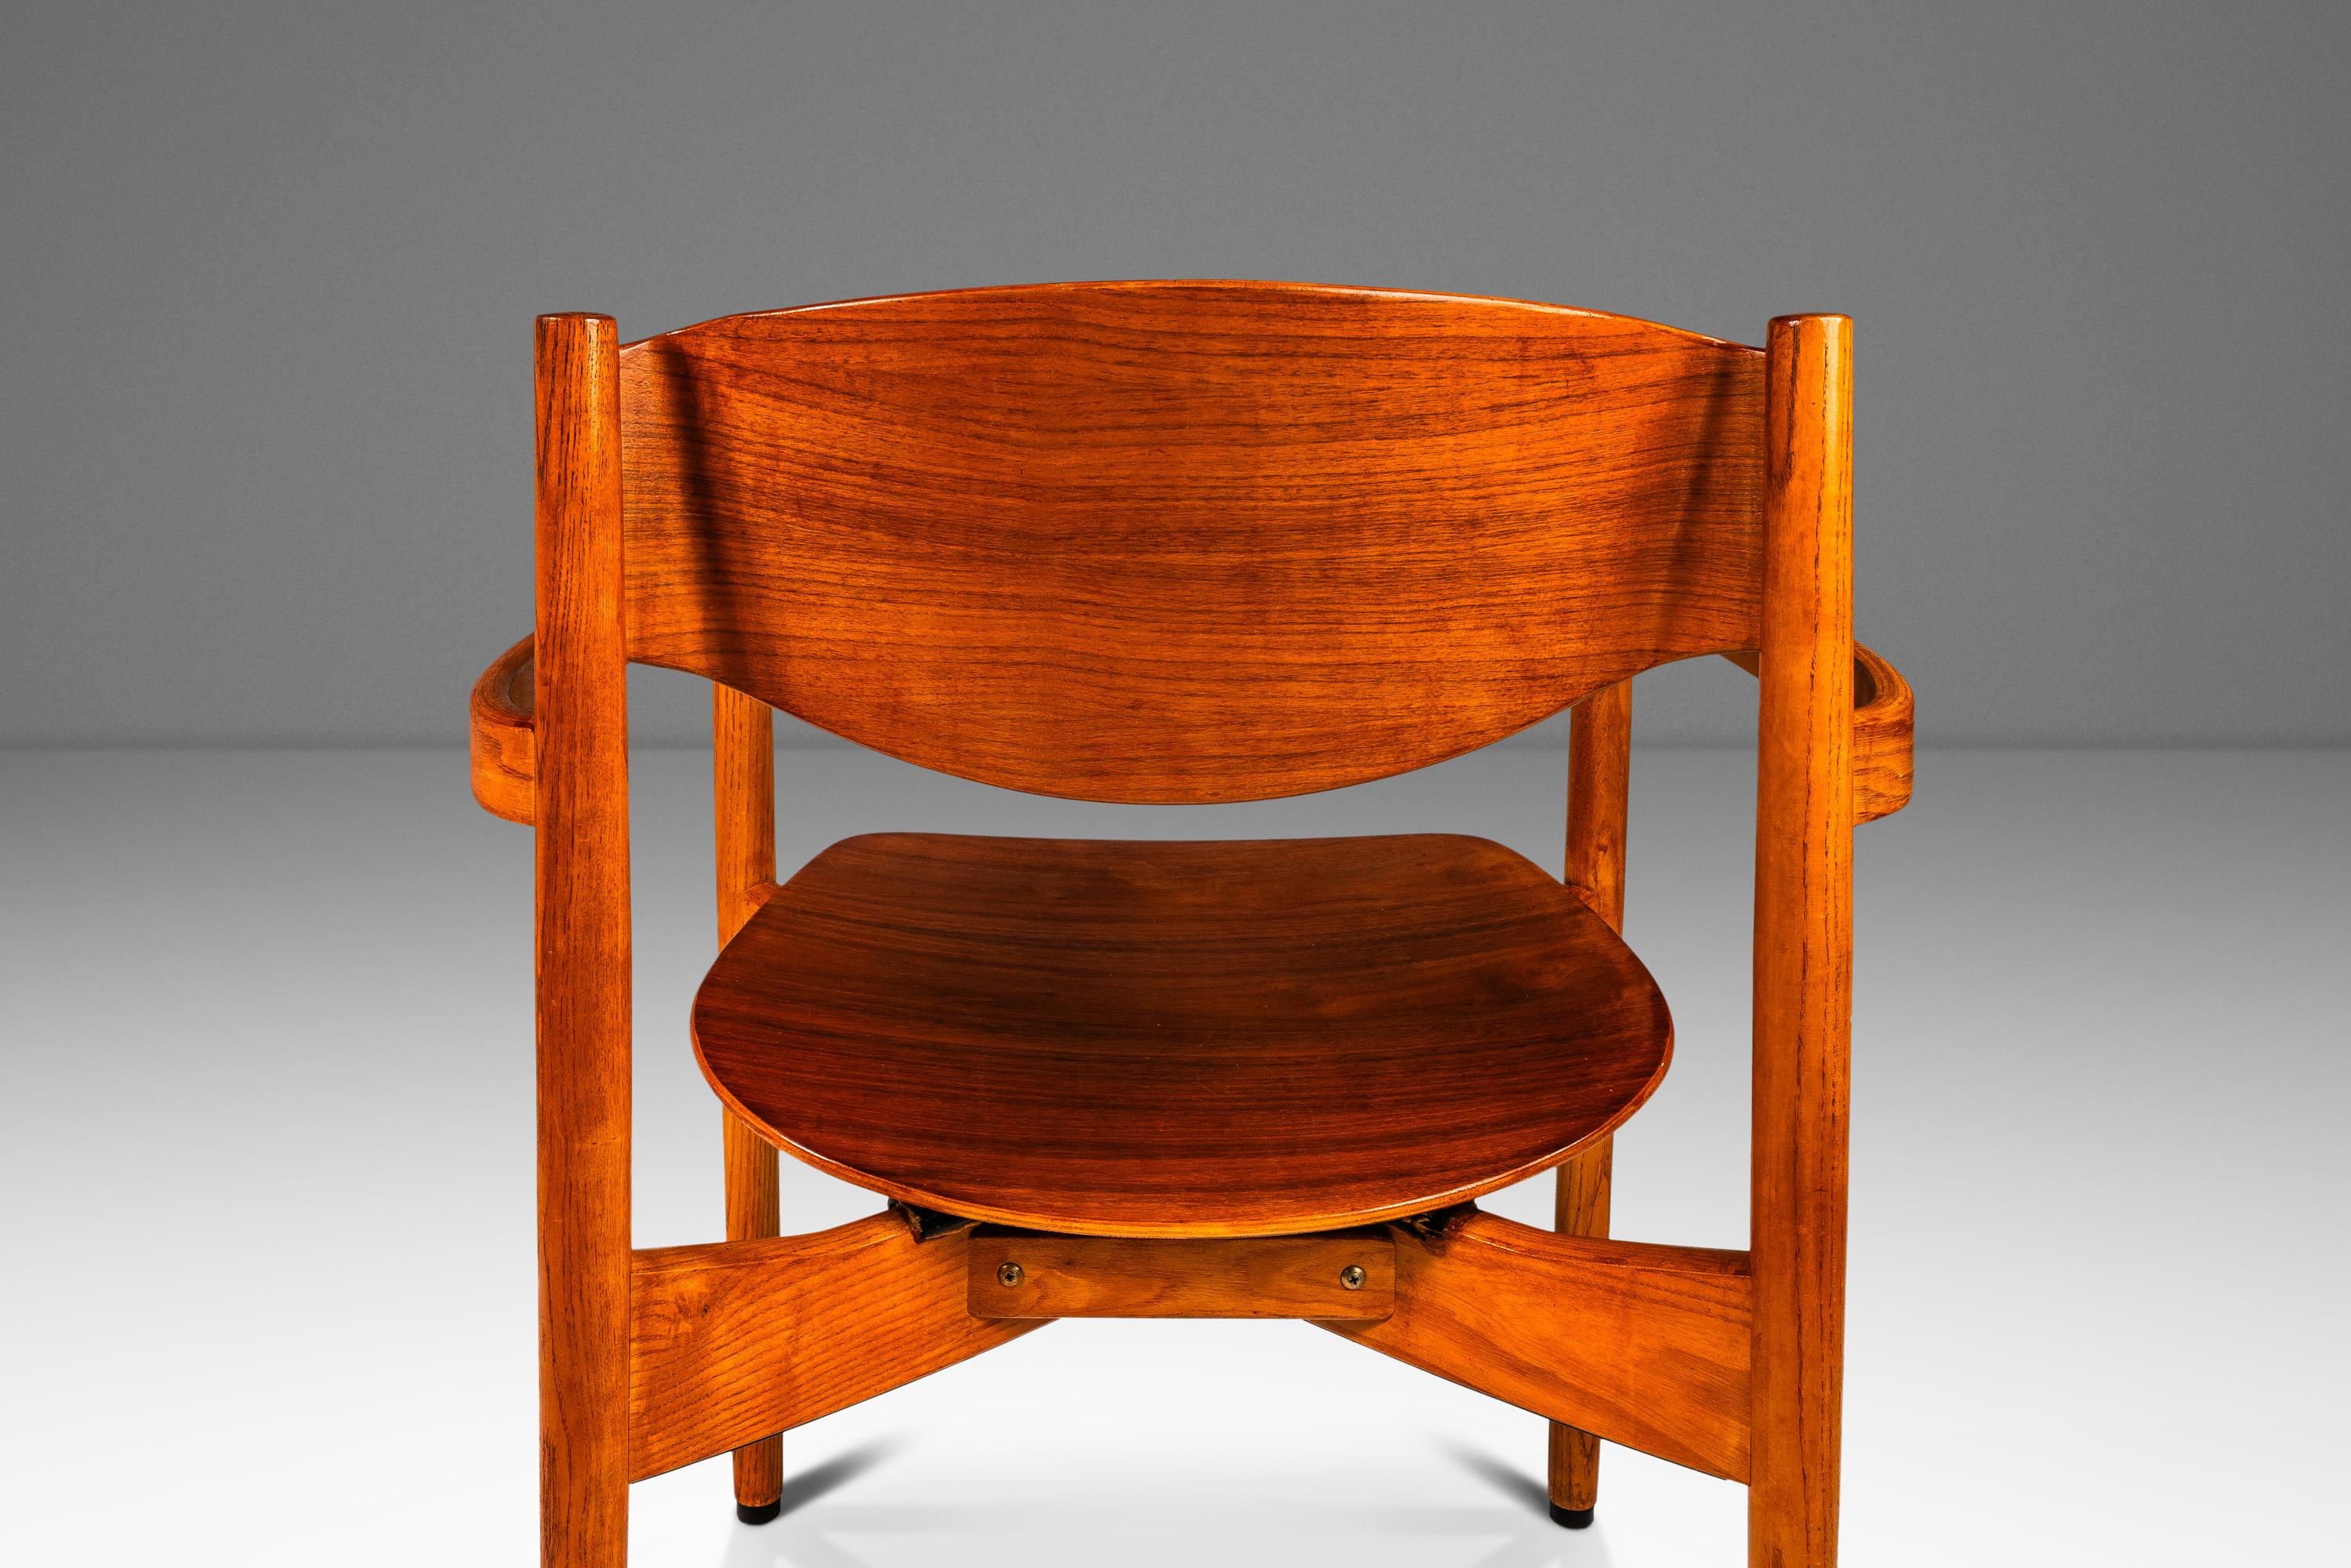 Set of 2 Stacking in Oak & Walnut Chairs by Jens Risom, USA, c. 1960s For Sale 5